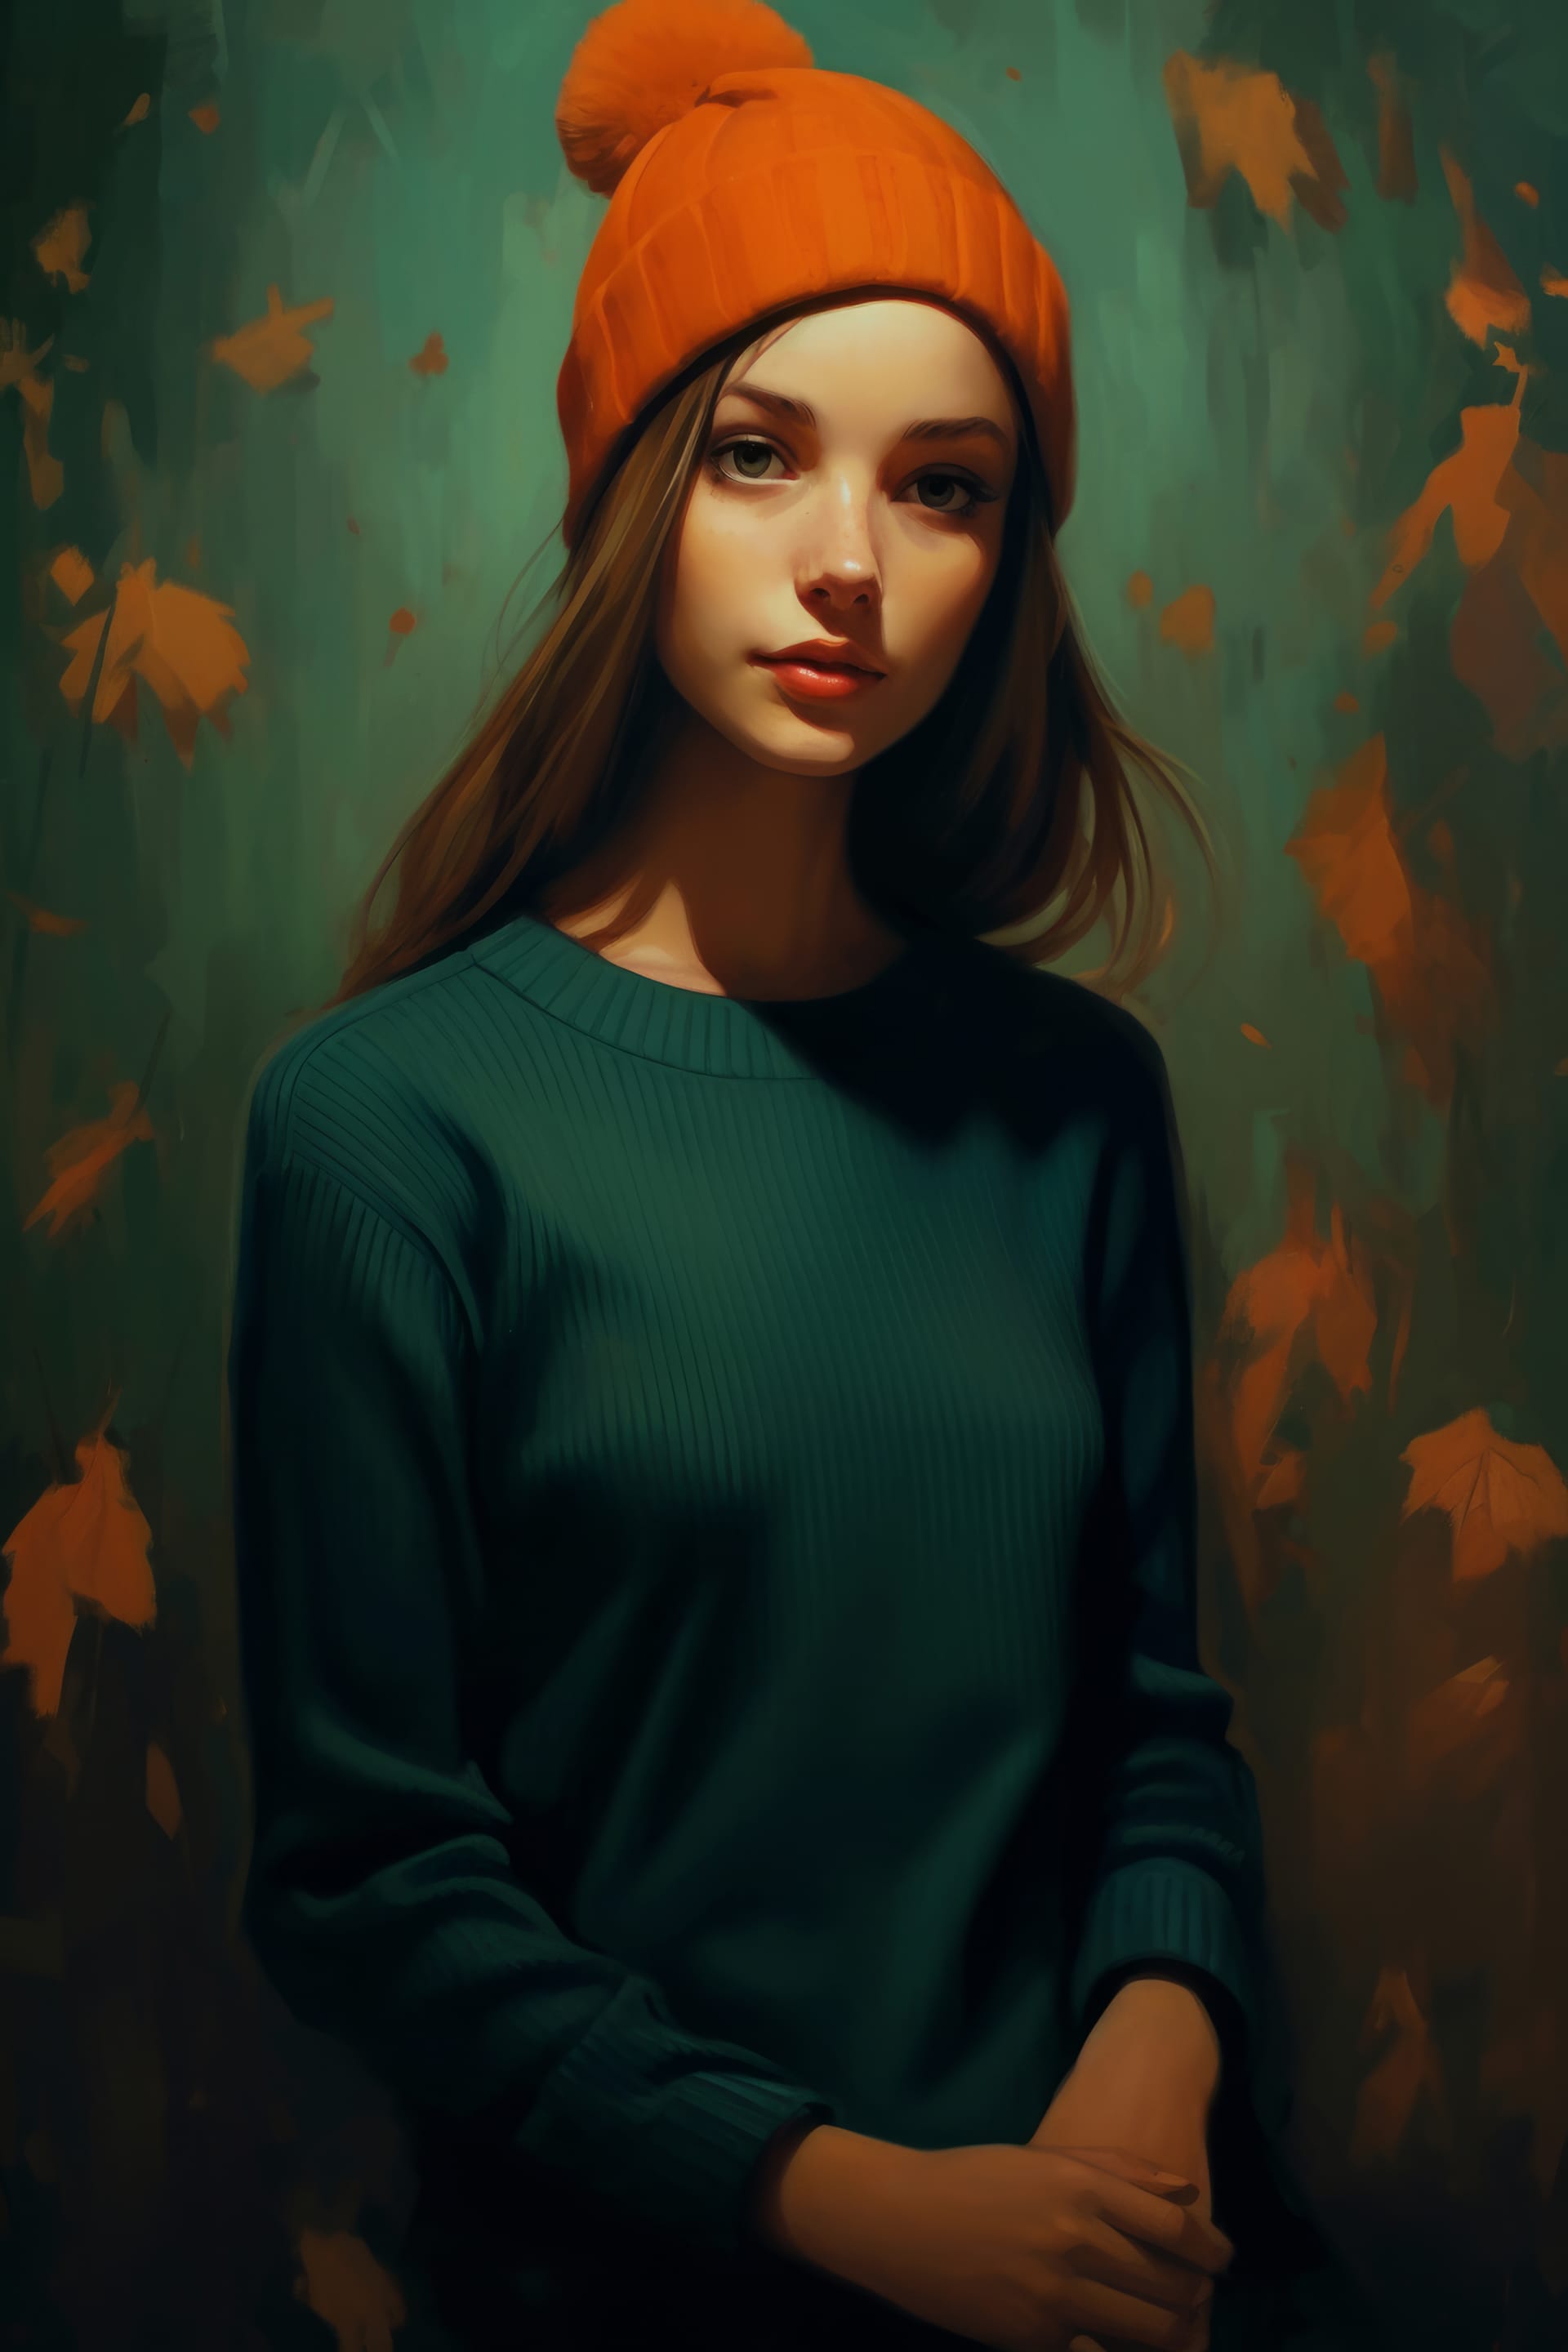 Balanced portraiture young girl with green dress orange hat